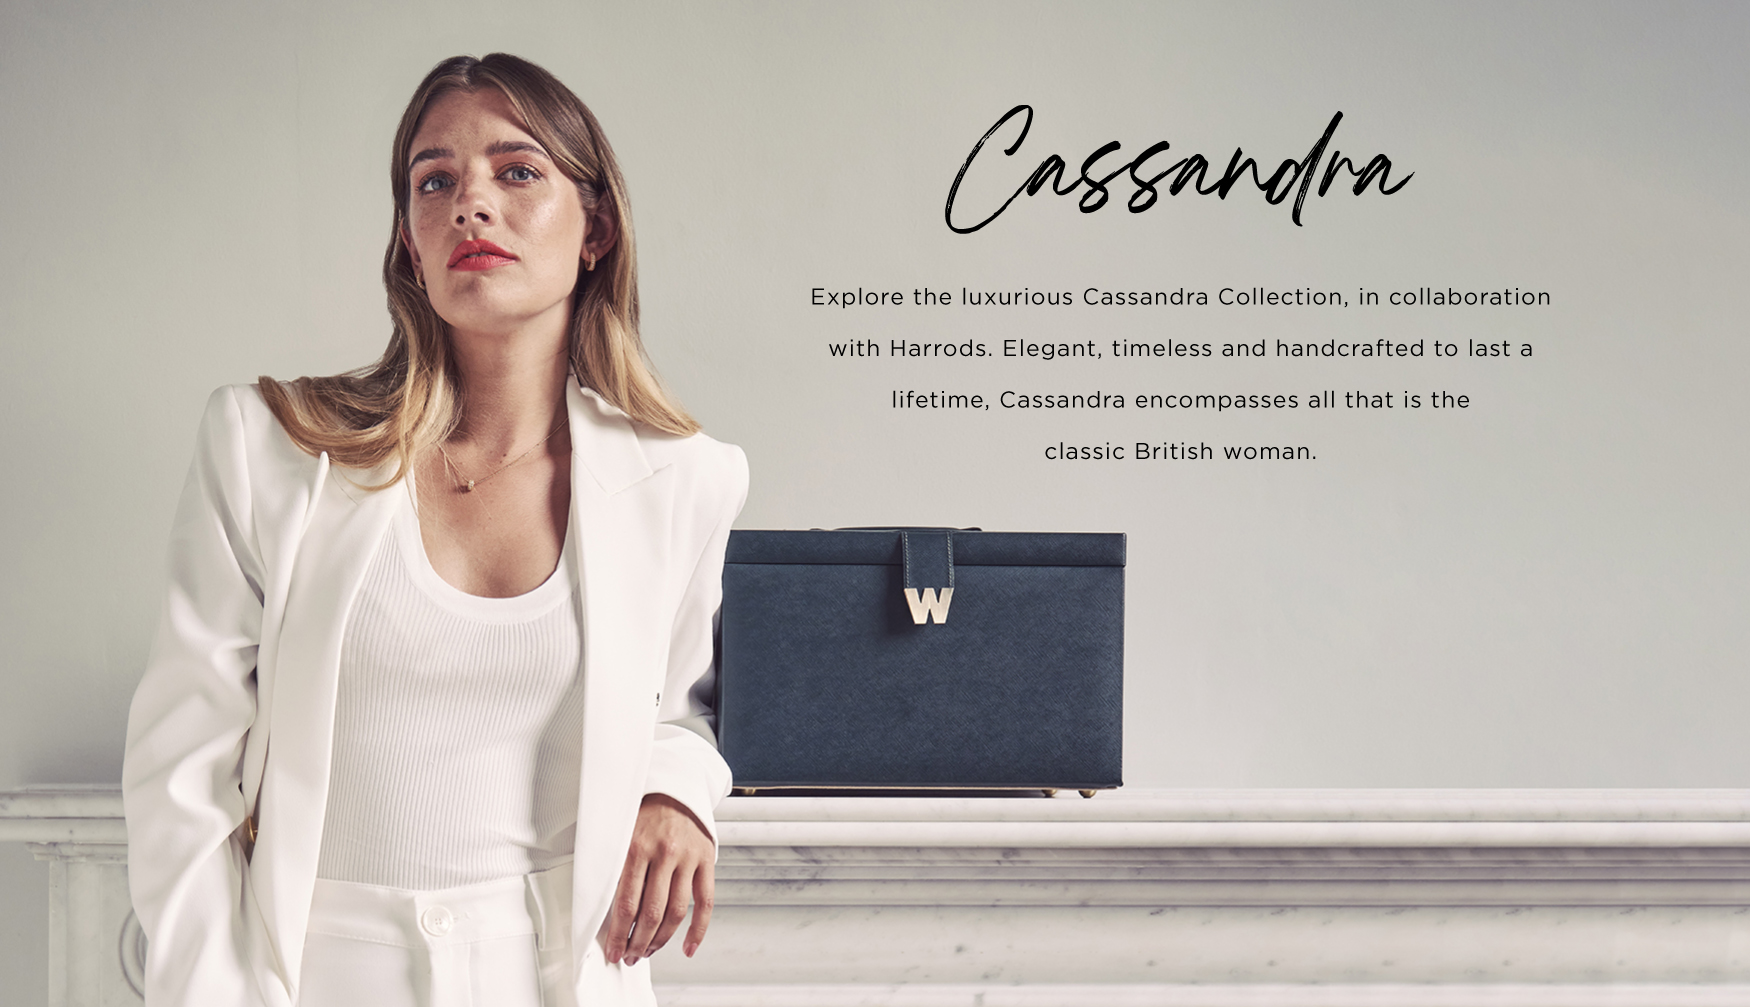 Explore the luxurious Cassandra Collection, in collaboration with Harrods. Elegant, timeless and handcrafted to last a lifetime, Cassandra encompasses all that is the classic British woman.